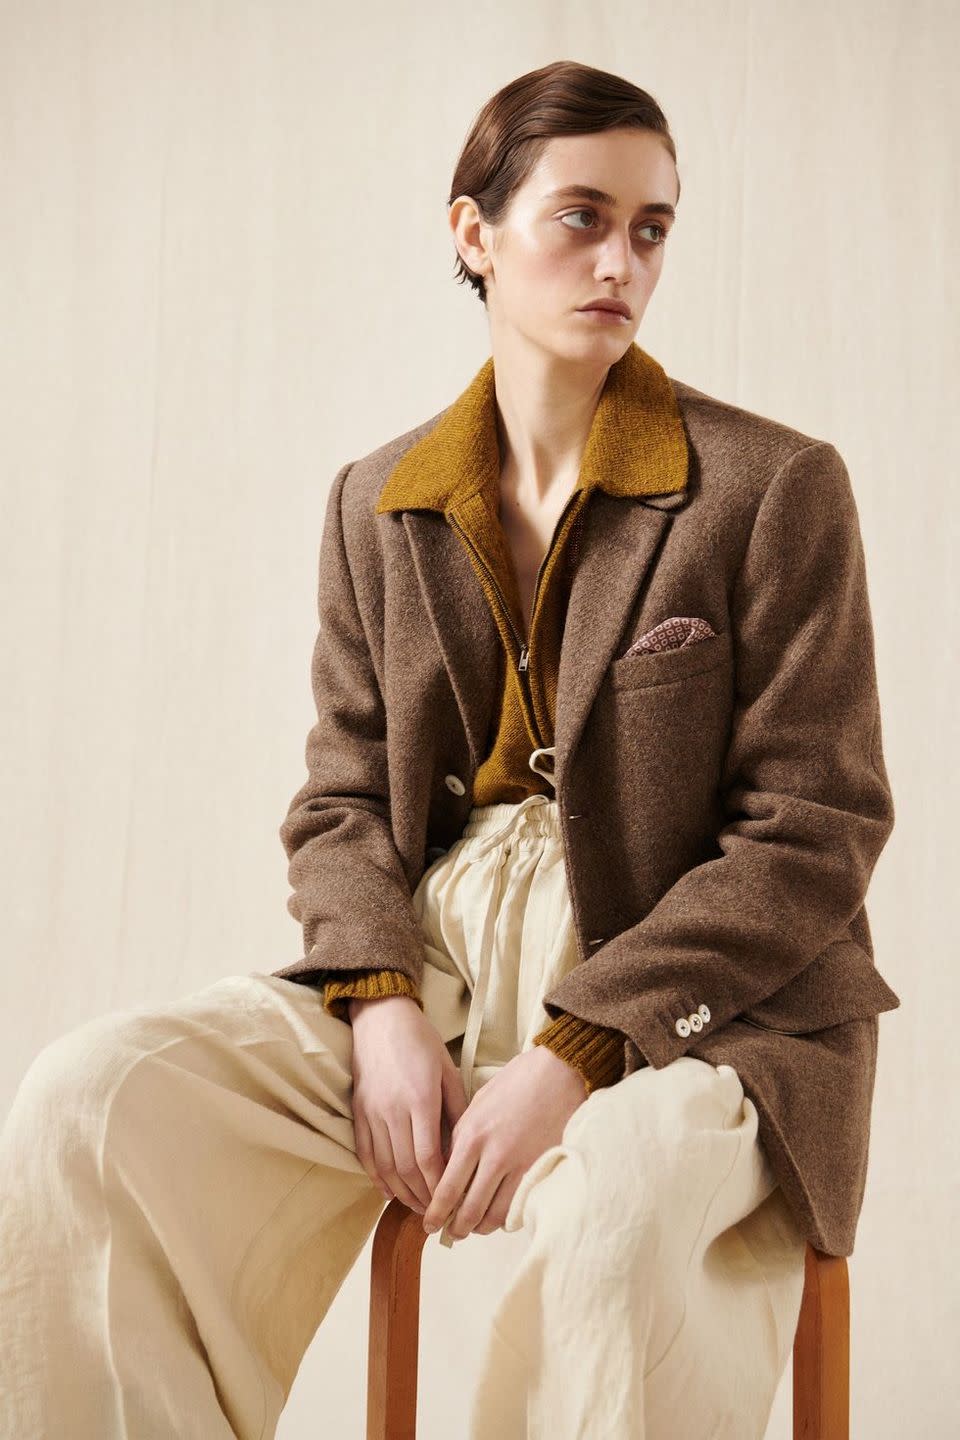 <p>Quality over quantity—or frills or drama or loudness, honestly. Marco Zanini seemingly took the strange, quiet time of the pandemic to further study and refine what defines his clothes, turning out a fall collection that turns heads not immediately, but slowly and seductively. It's a testament to the fabrics used that their luxe handfeel is apparent even through a screen; these are clothes you'd want to let your fingers slowly graze over, instinctively understanding that not all wools and cashmeres are created equal. It's a near perfect example of the oft-instructed idea to invest in classics that will stand the test of time, both in appearance and construction. From long sweater dresses to coats and suiting, every single piece is of the sort you'd hold onto forever.<em>—Leah Melby Clinton</em></p>